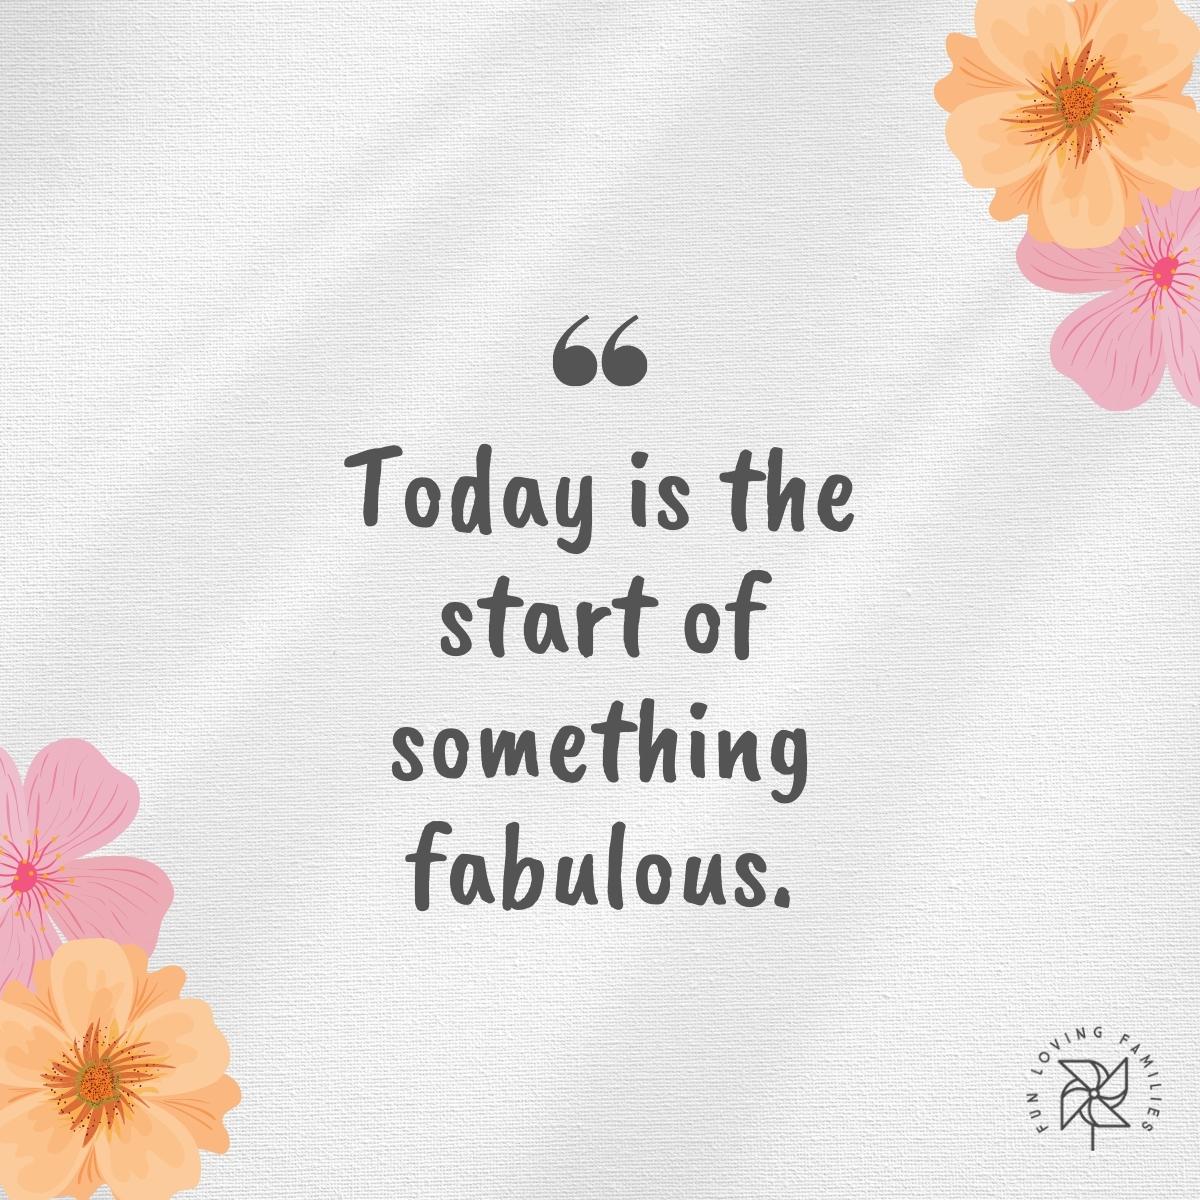 Today is the start of something fabulous affirmation